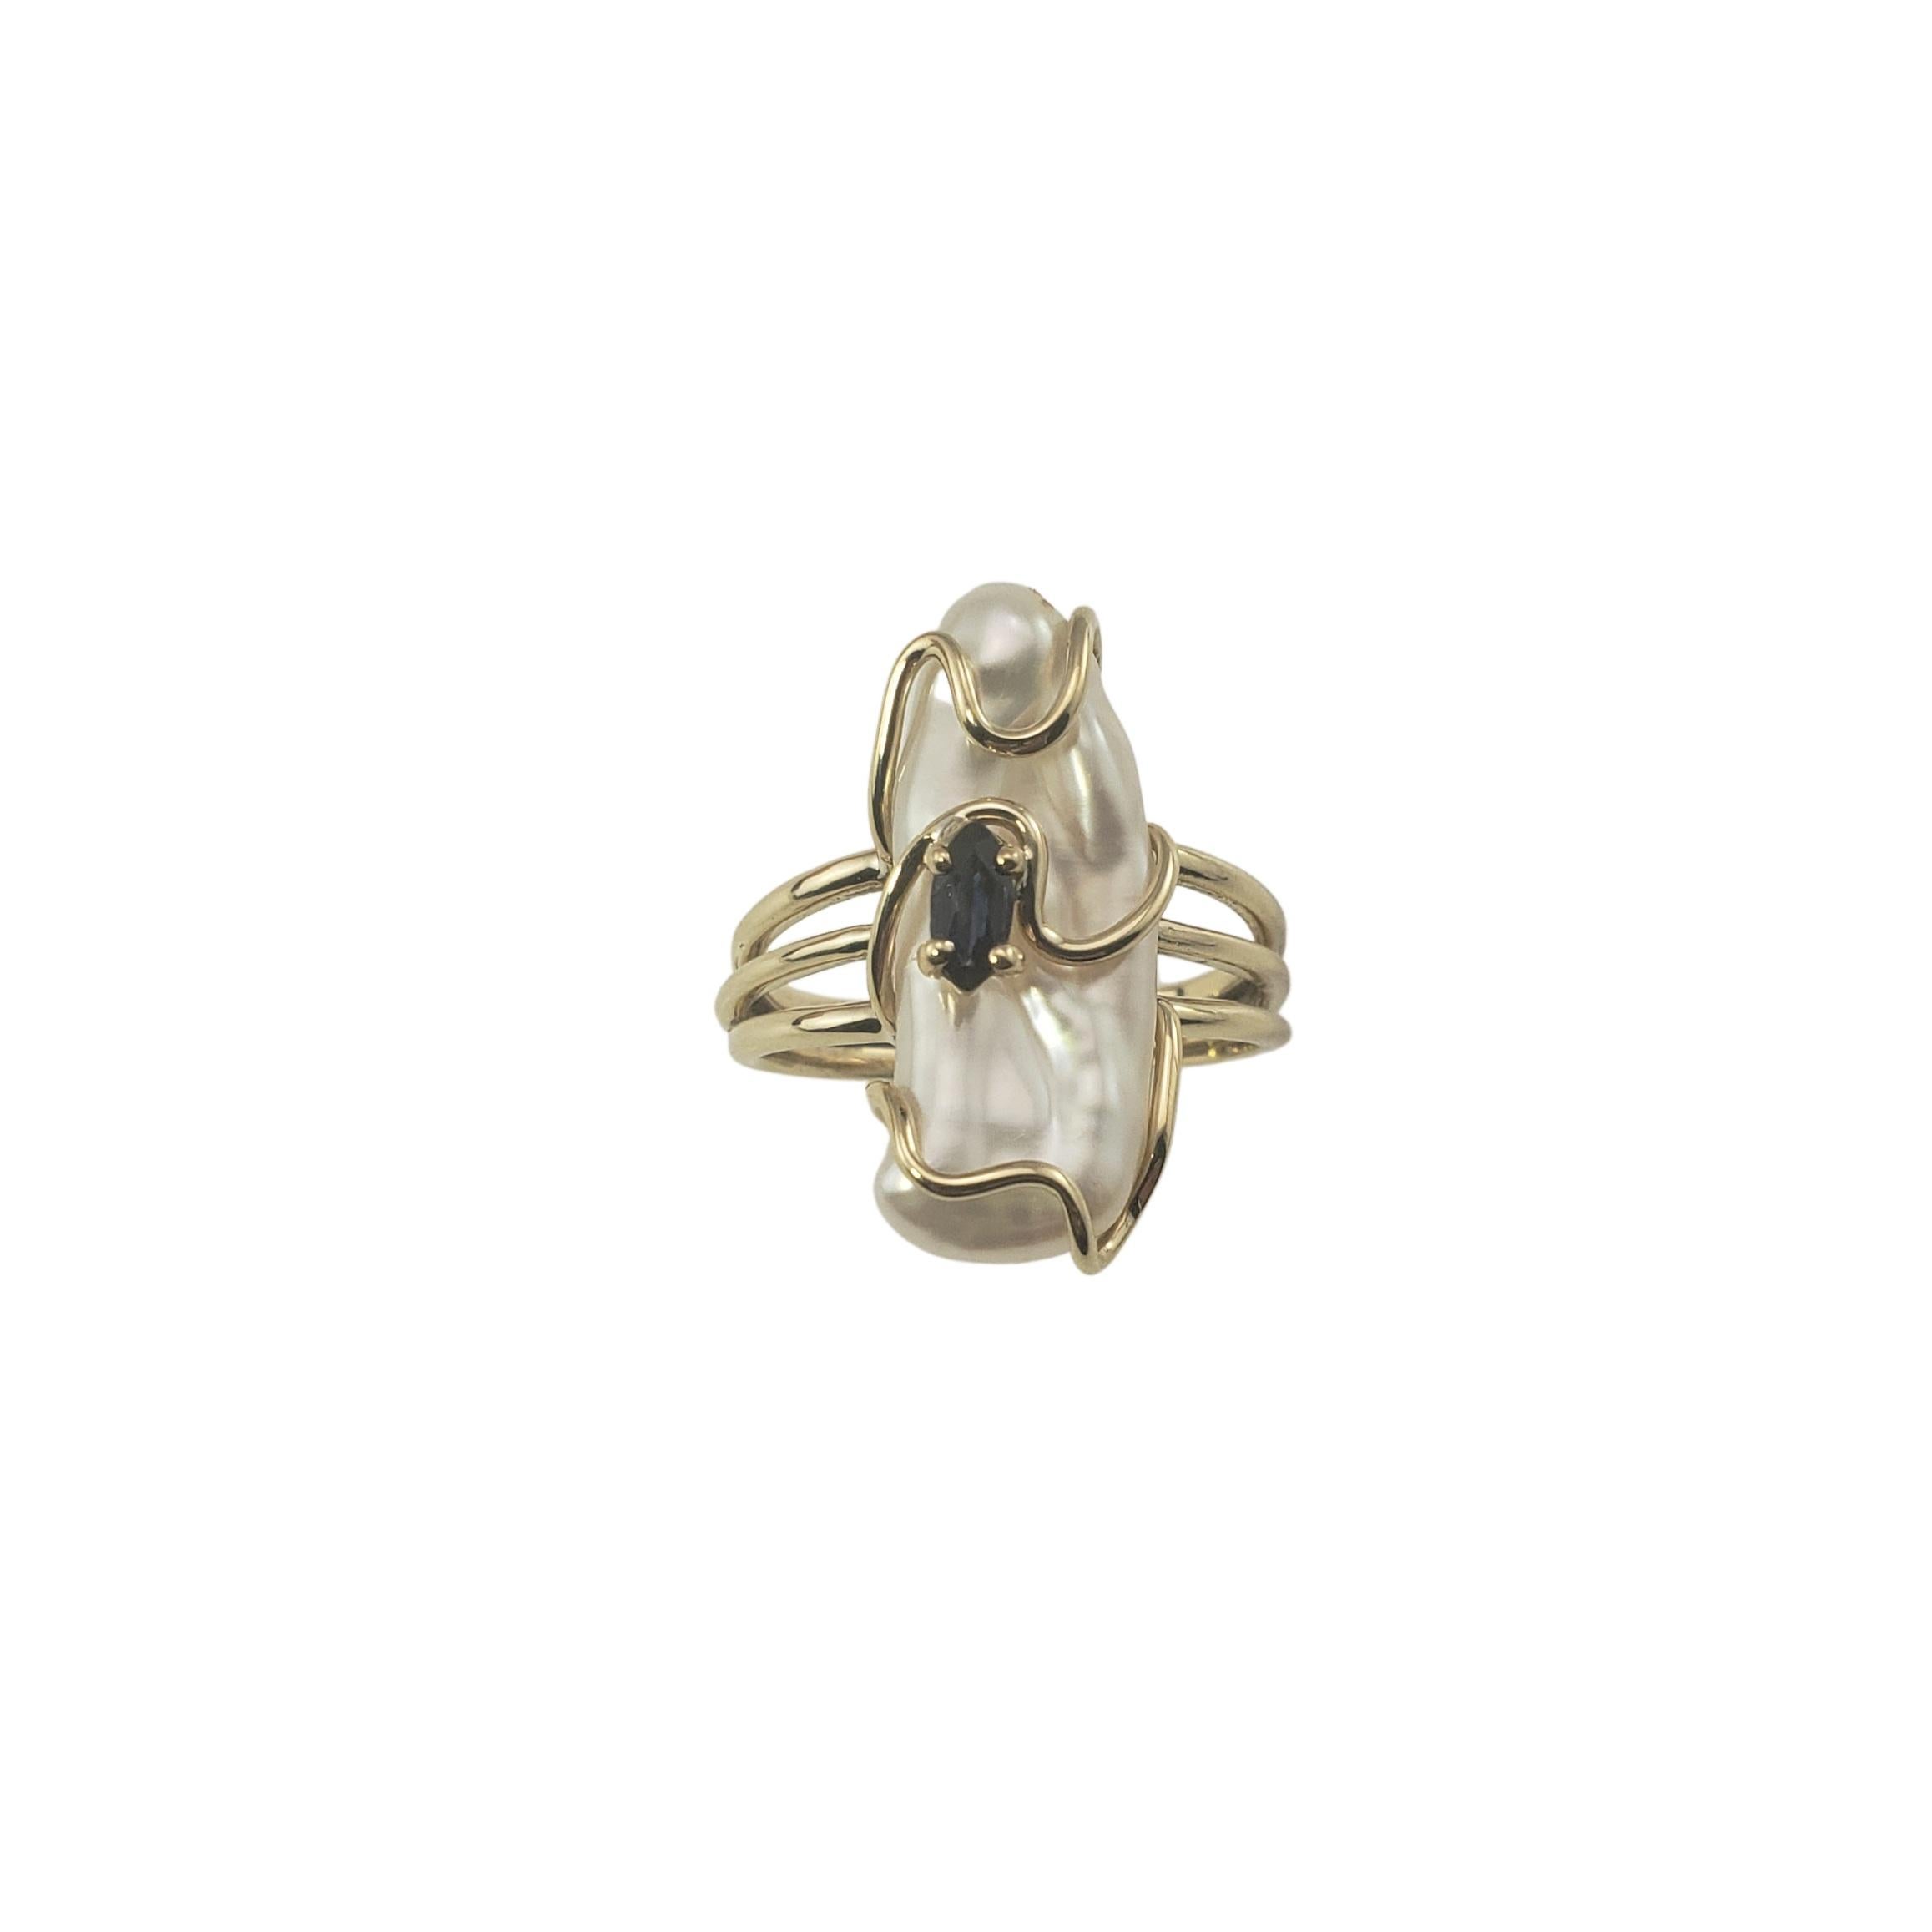 This lovely ring features one cultured baroque pearl (22 mm x 10 mm) and one marquis natural sapphire (5 mm x 3 mm) set in classic 14K yellow gold.

Natural sapphire is approx. 0.15cts. Medium slightly greenish blue 

Shank:  2 mm.

Size: